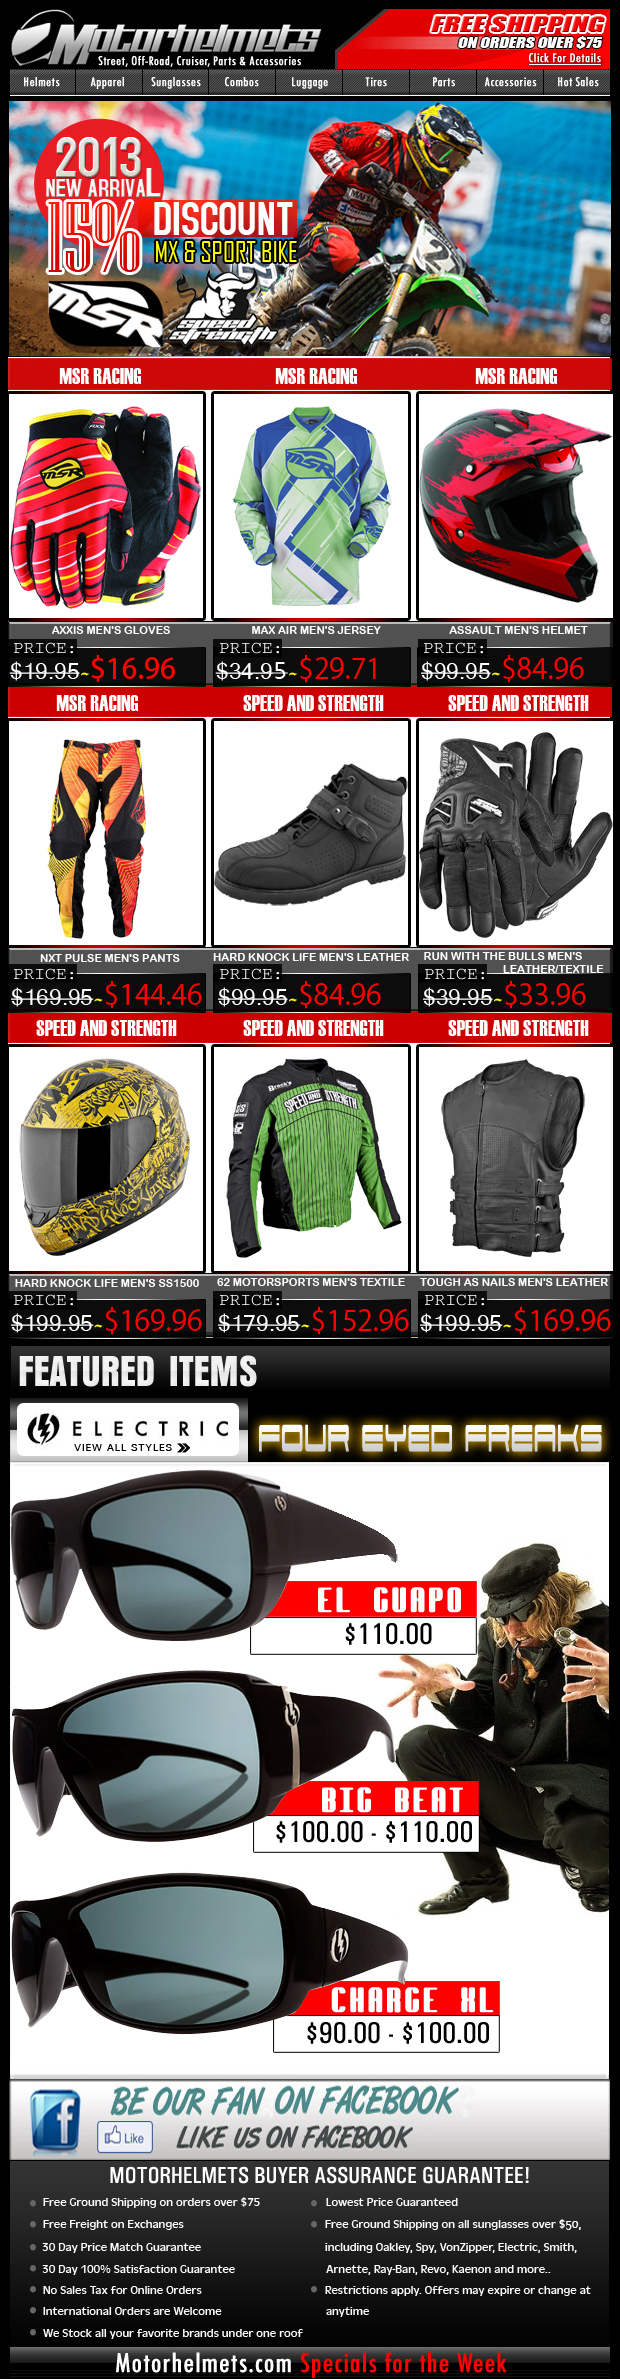 Holiday Specials...Up to 15% off on MSR and Speed & Strength Gear!